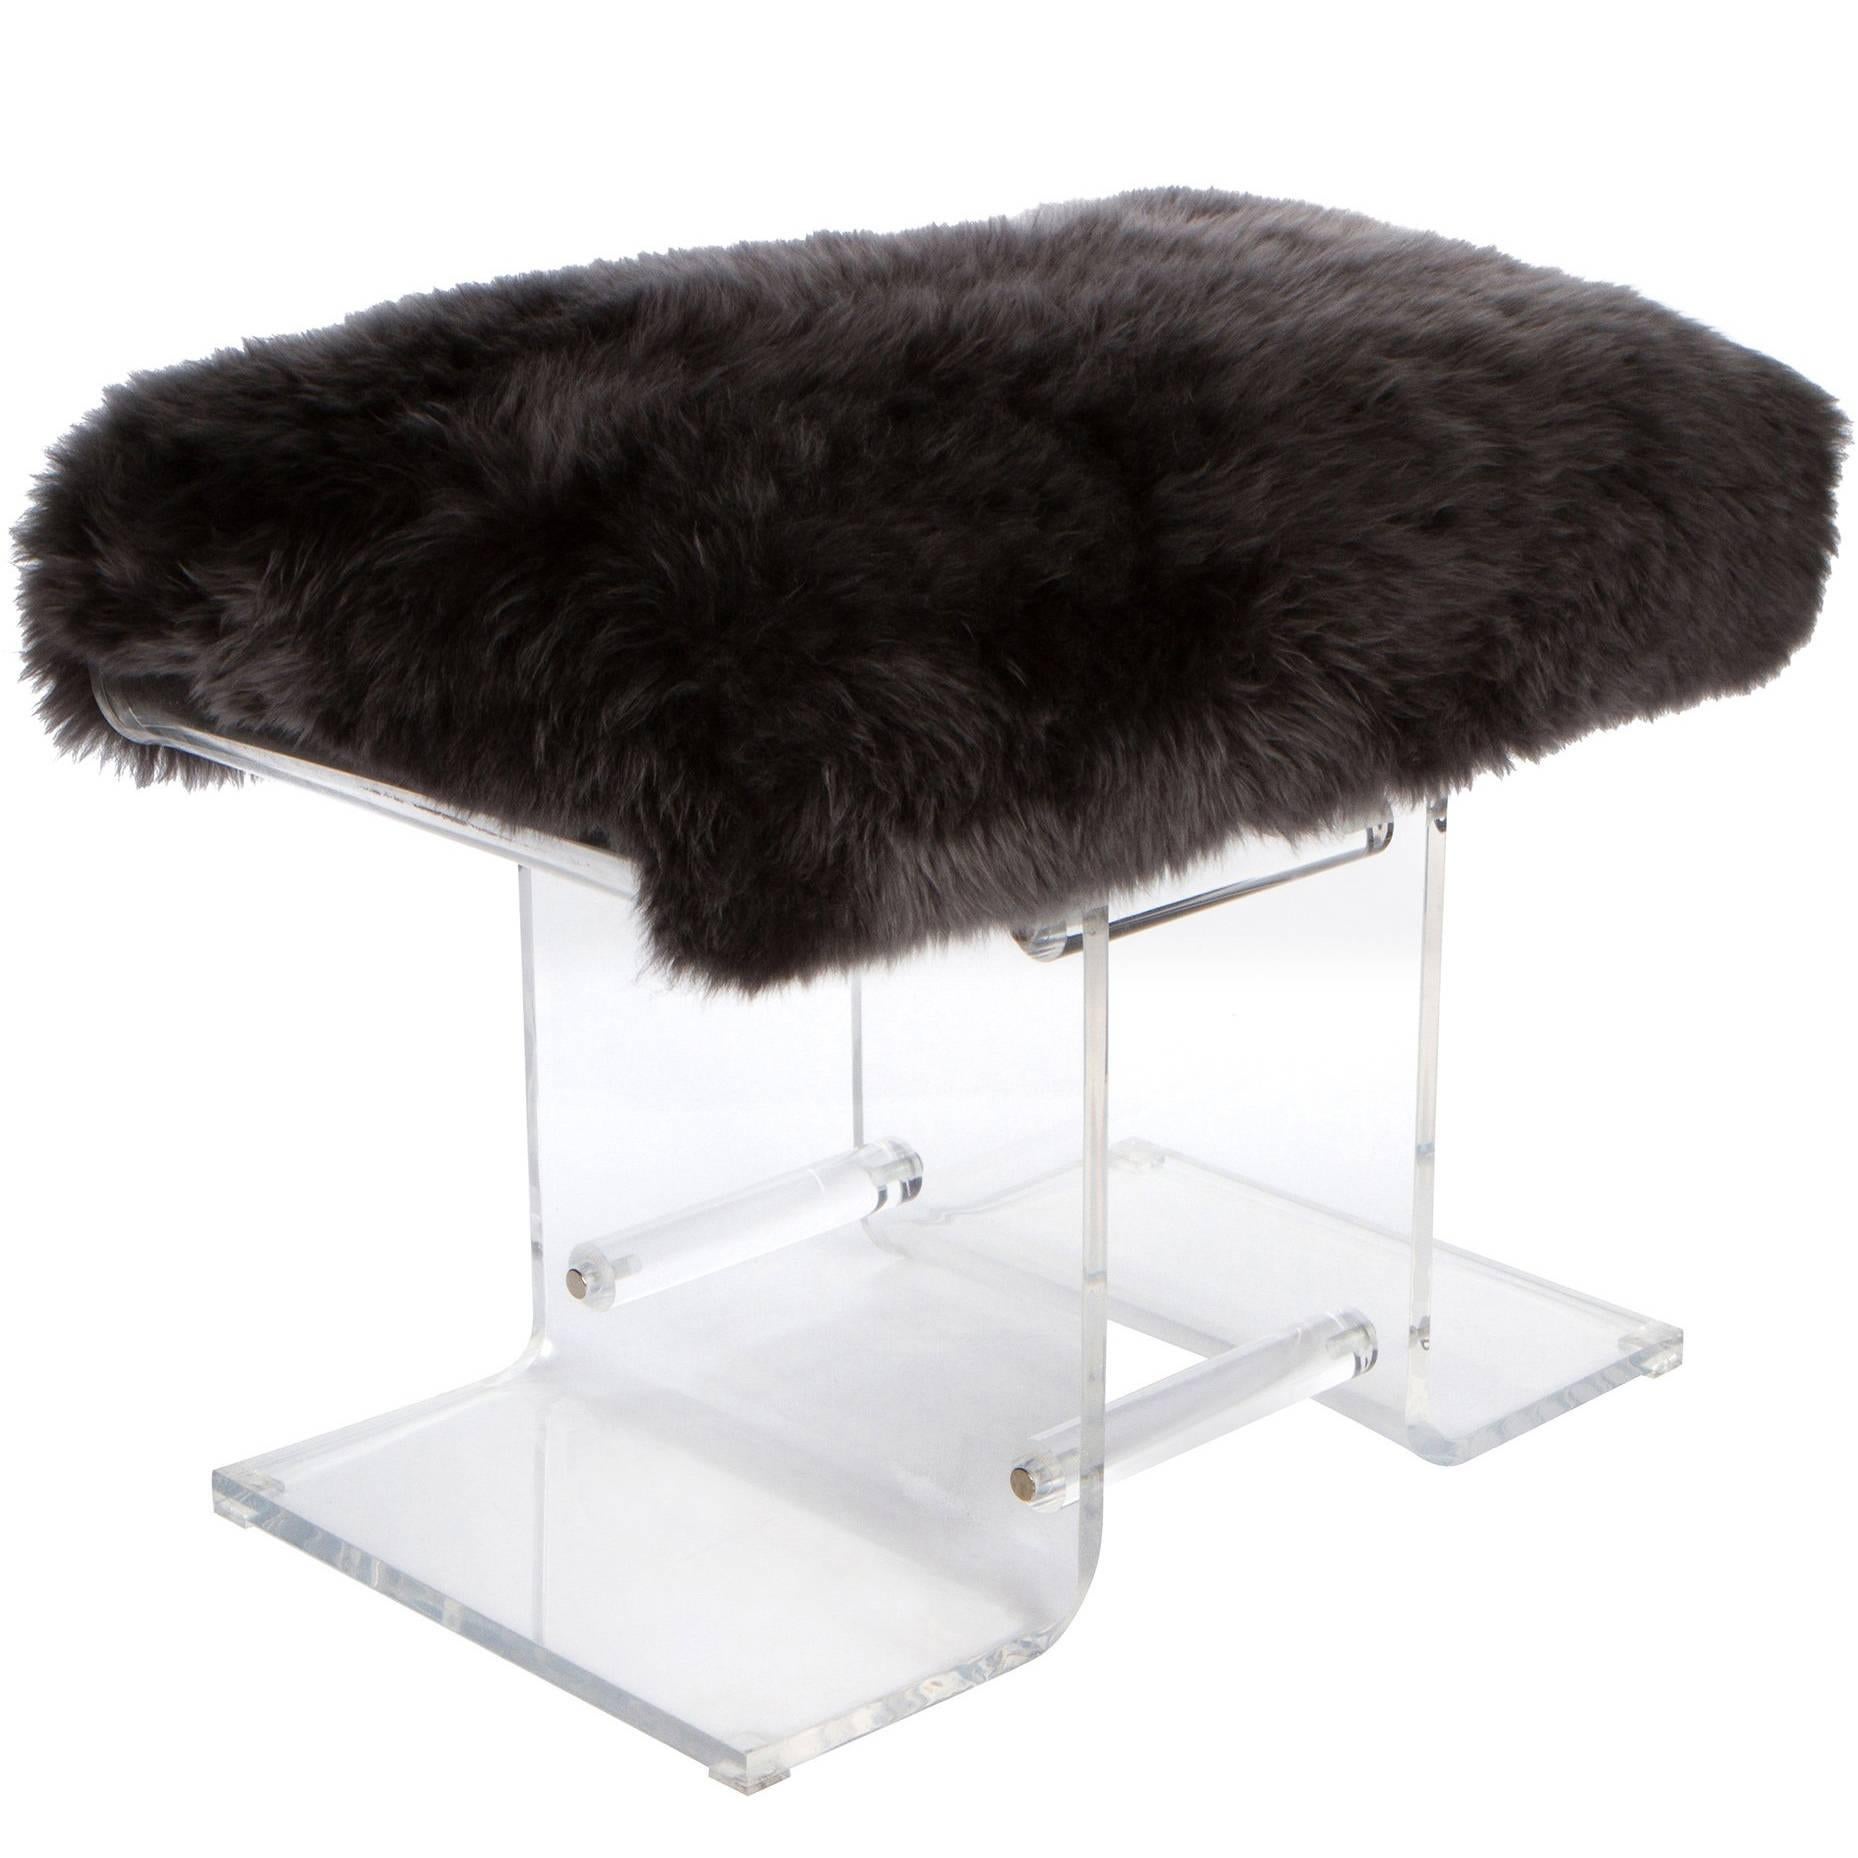 Lucite and Fur Bench, 1980's For Sale